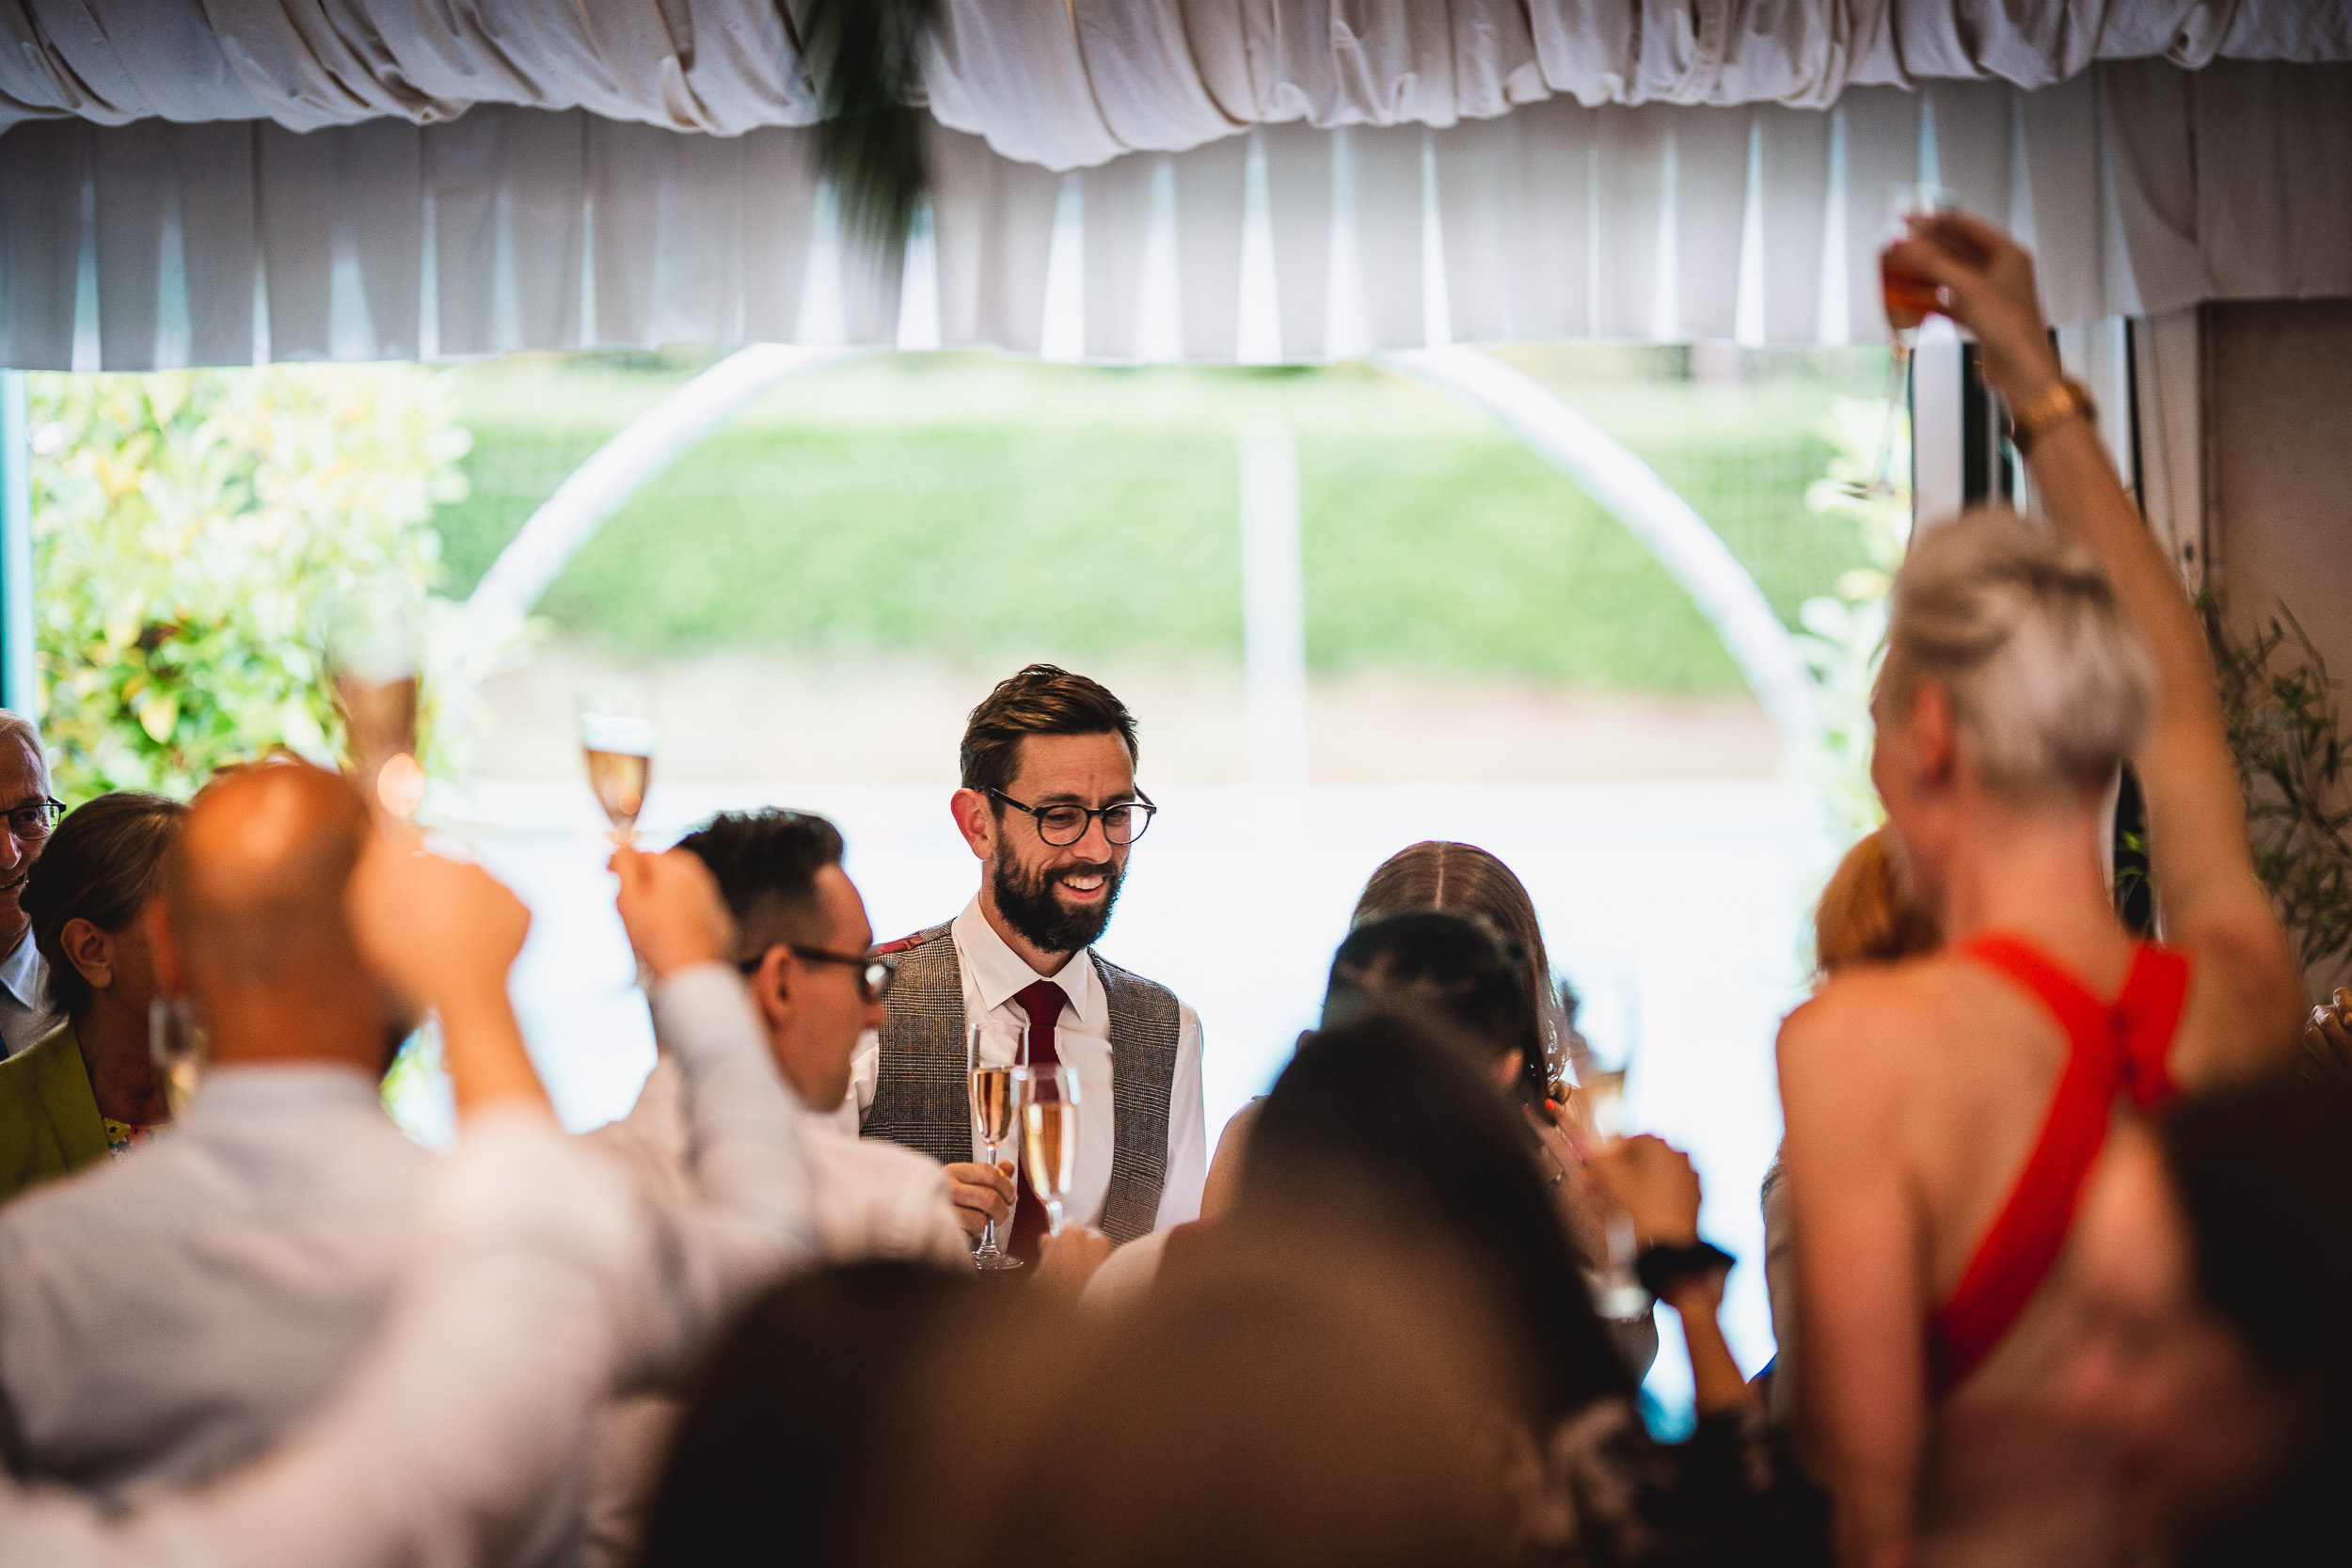 A Surrey wedding reception at Ridge Farm is the perfect setting for a beautiful bride and groom.